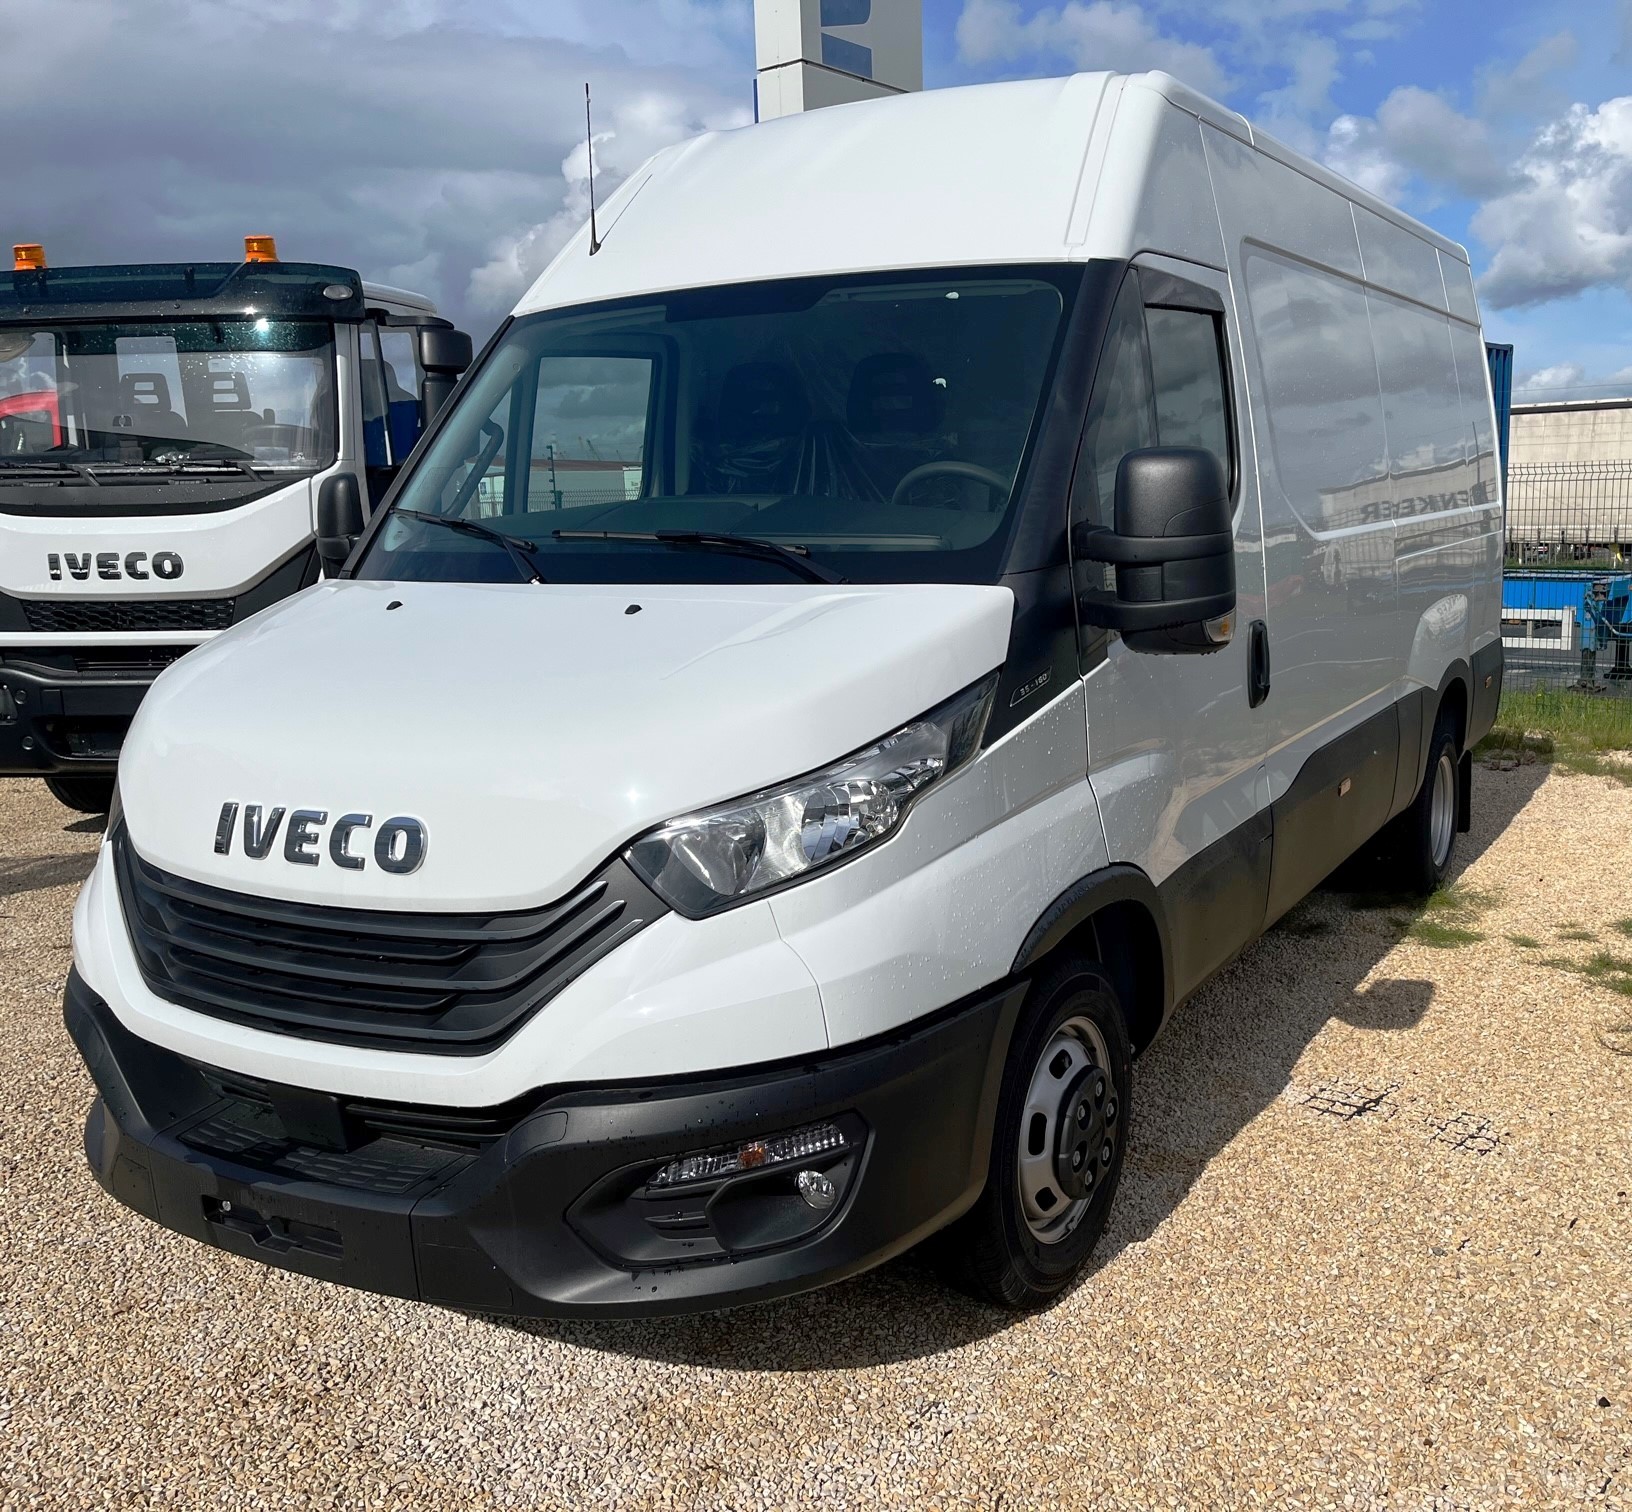 IVECO Daily 35C16V?width=462